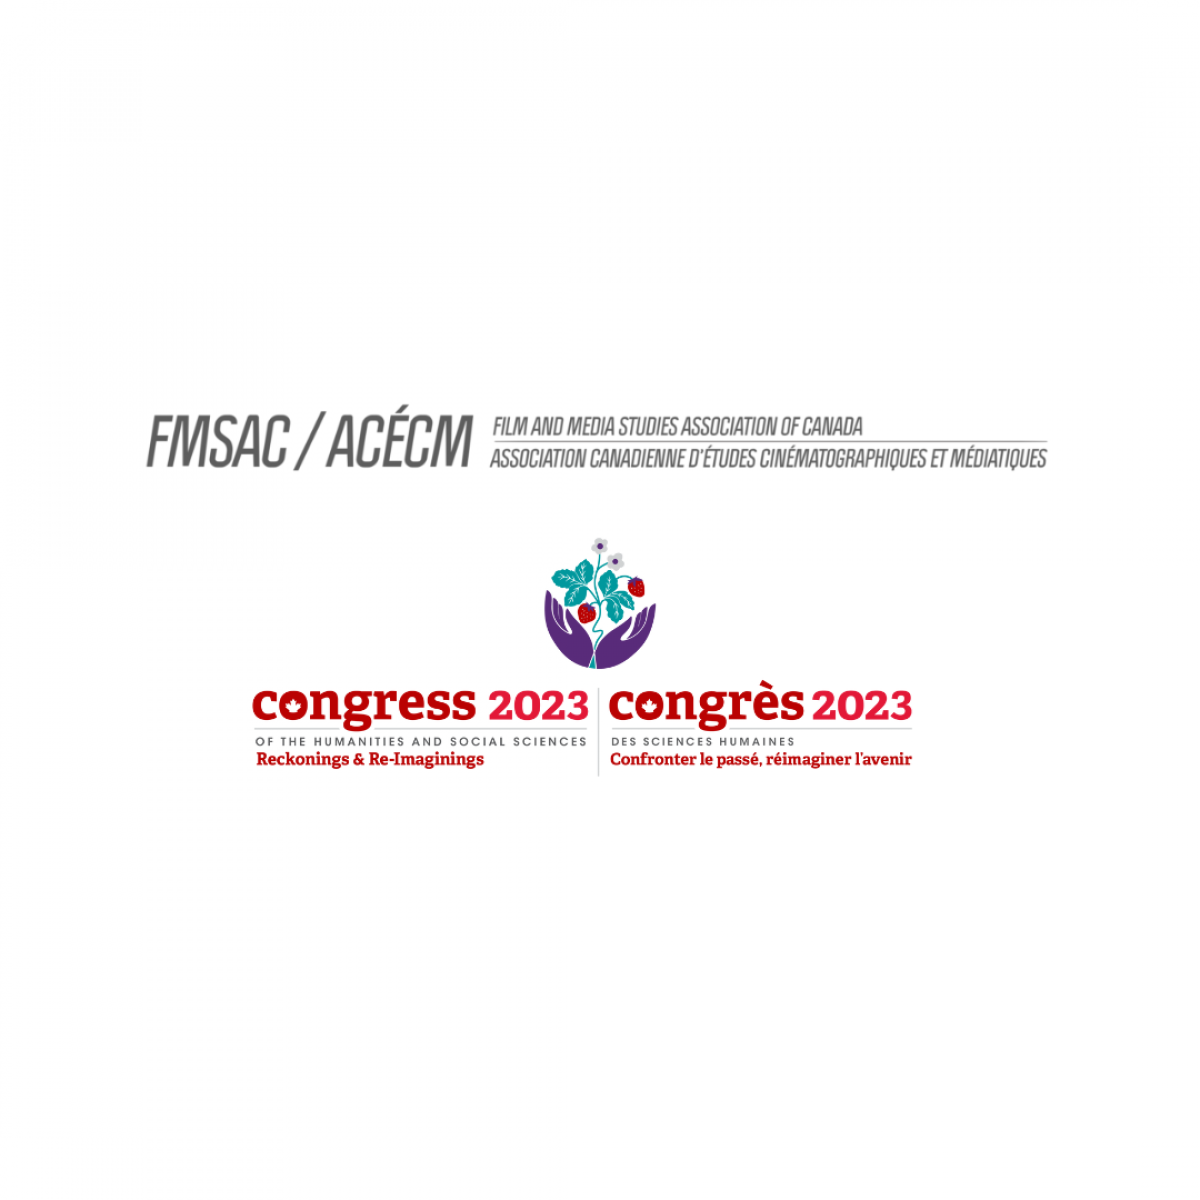 A square white promotional square image of the logos for the FMSAC conference and the 2023 Congress of the Humanities and Social Sciences.